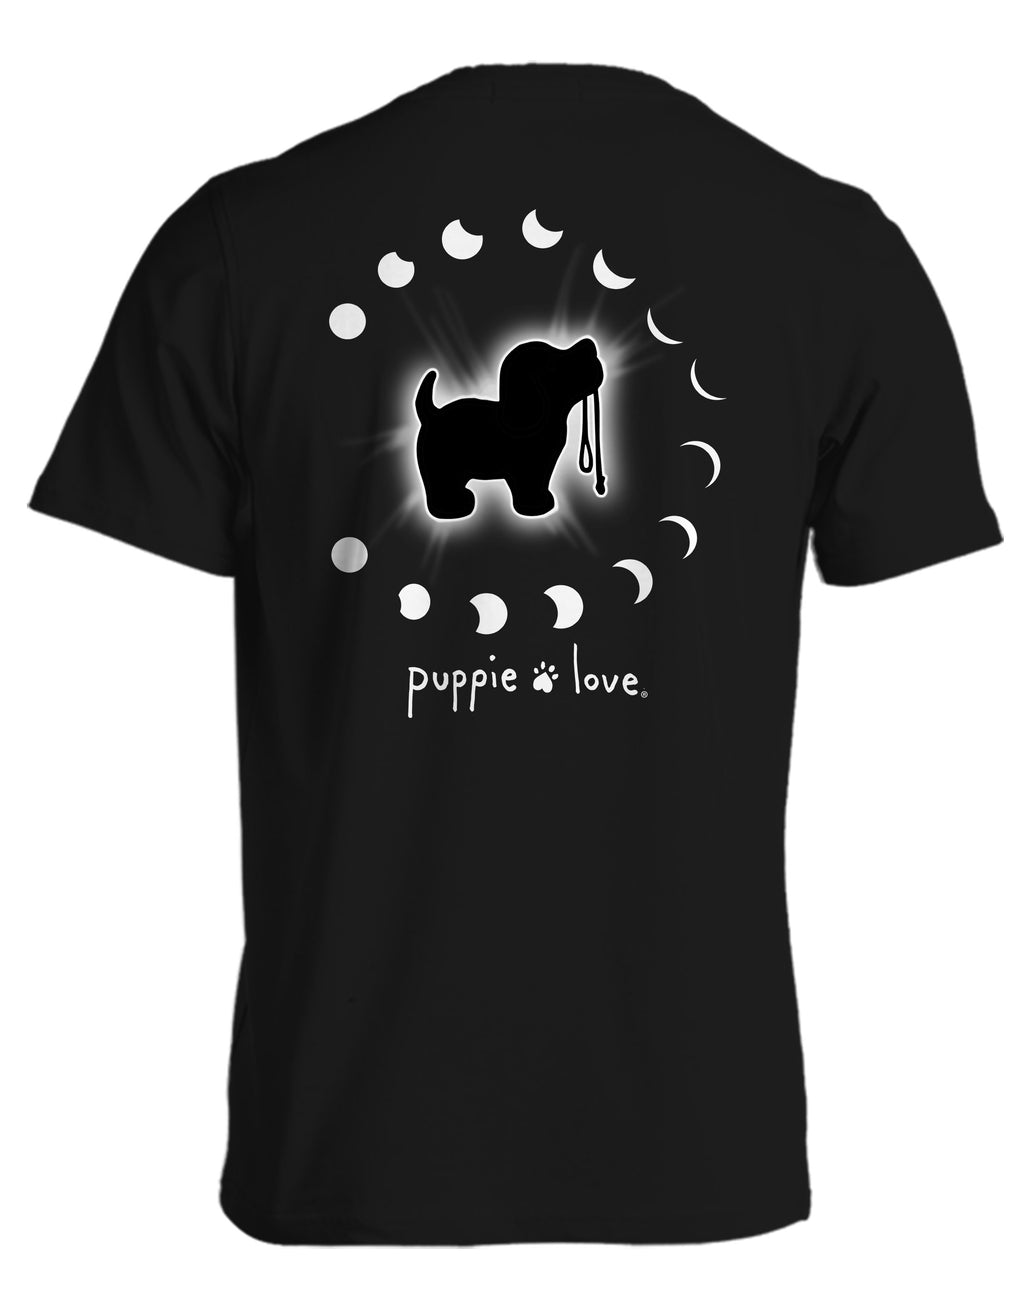 SOLAR ECLIPSE PUP (PRE-ORDER, SHIPS IN 2 WEEKS) - Puppie Love